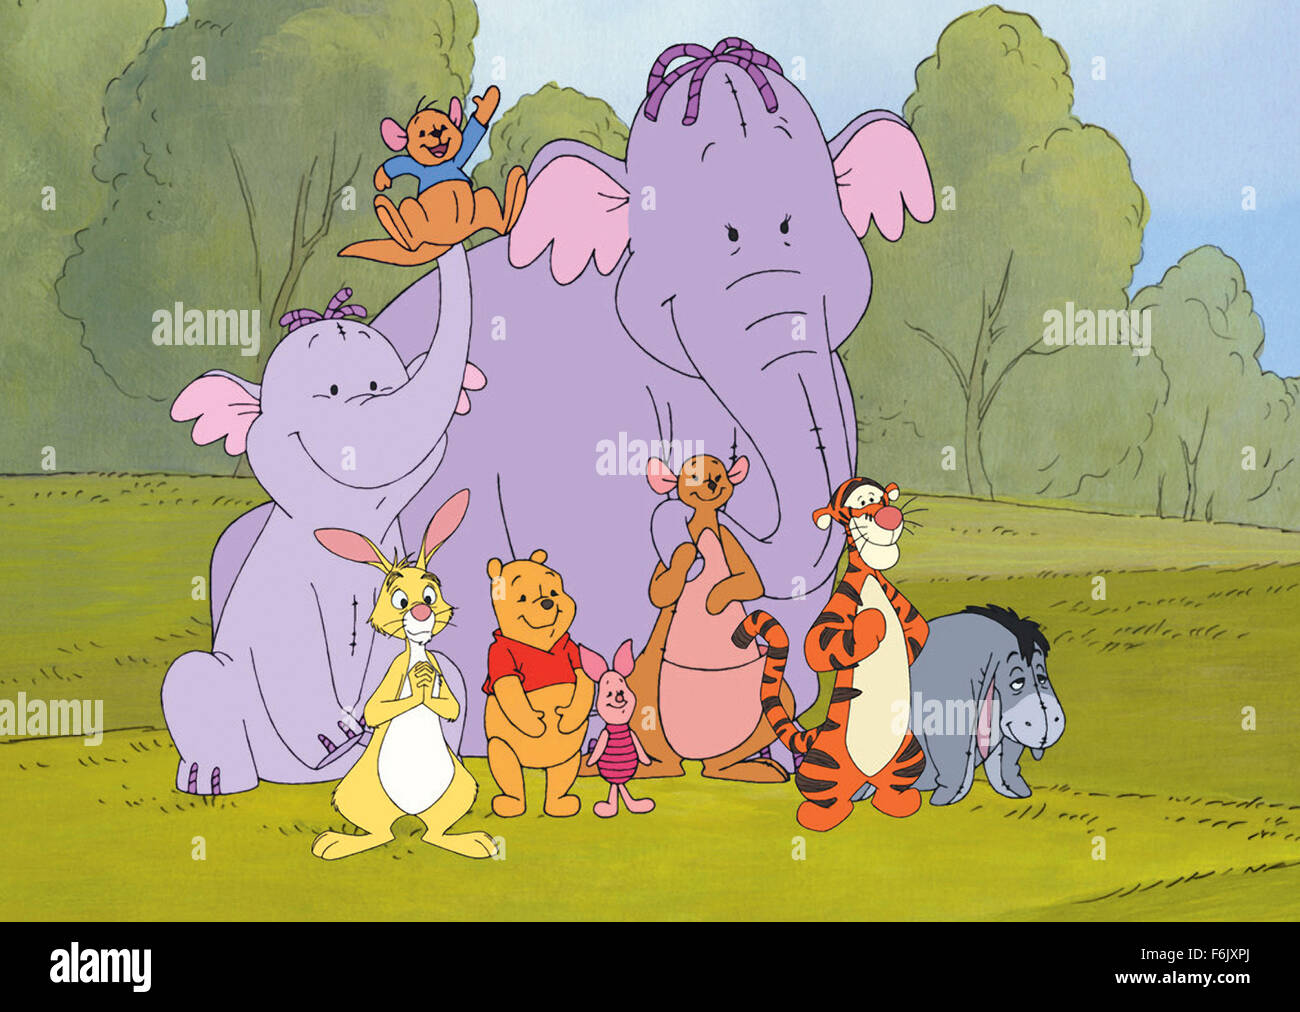 RELEASE DATE: February 11, 2005   MOVIE TITLE: Pooh's Heffalump Movie   STUDIO: Walt Disney Pictures   PLOT: A heffalump is heard trumpeting in the hundred acre woods. Winnie the Pooh, Tigger, and Piglet are scared and rush to Rabbit's house for advice. Roo joins them and they all agree that Heffalumps are nearby after finding a huge footprint. They decide to set out on an expedition to catch the Heffalump. Roo is not allowed to come along because he is too little. Directed by Frank Nissen.   PICTURED: Still from the movie.   (Credit Image: c Walt Disney Pictures/Entertainment Pictures/PRE Stock Photo